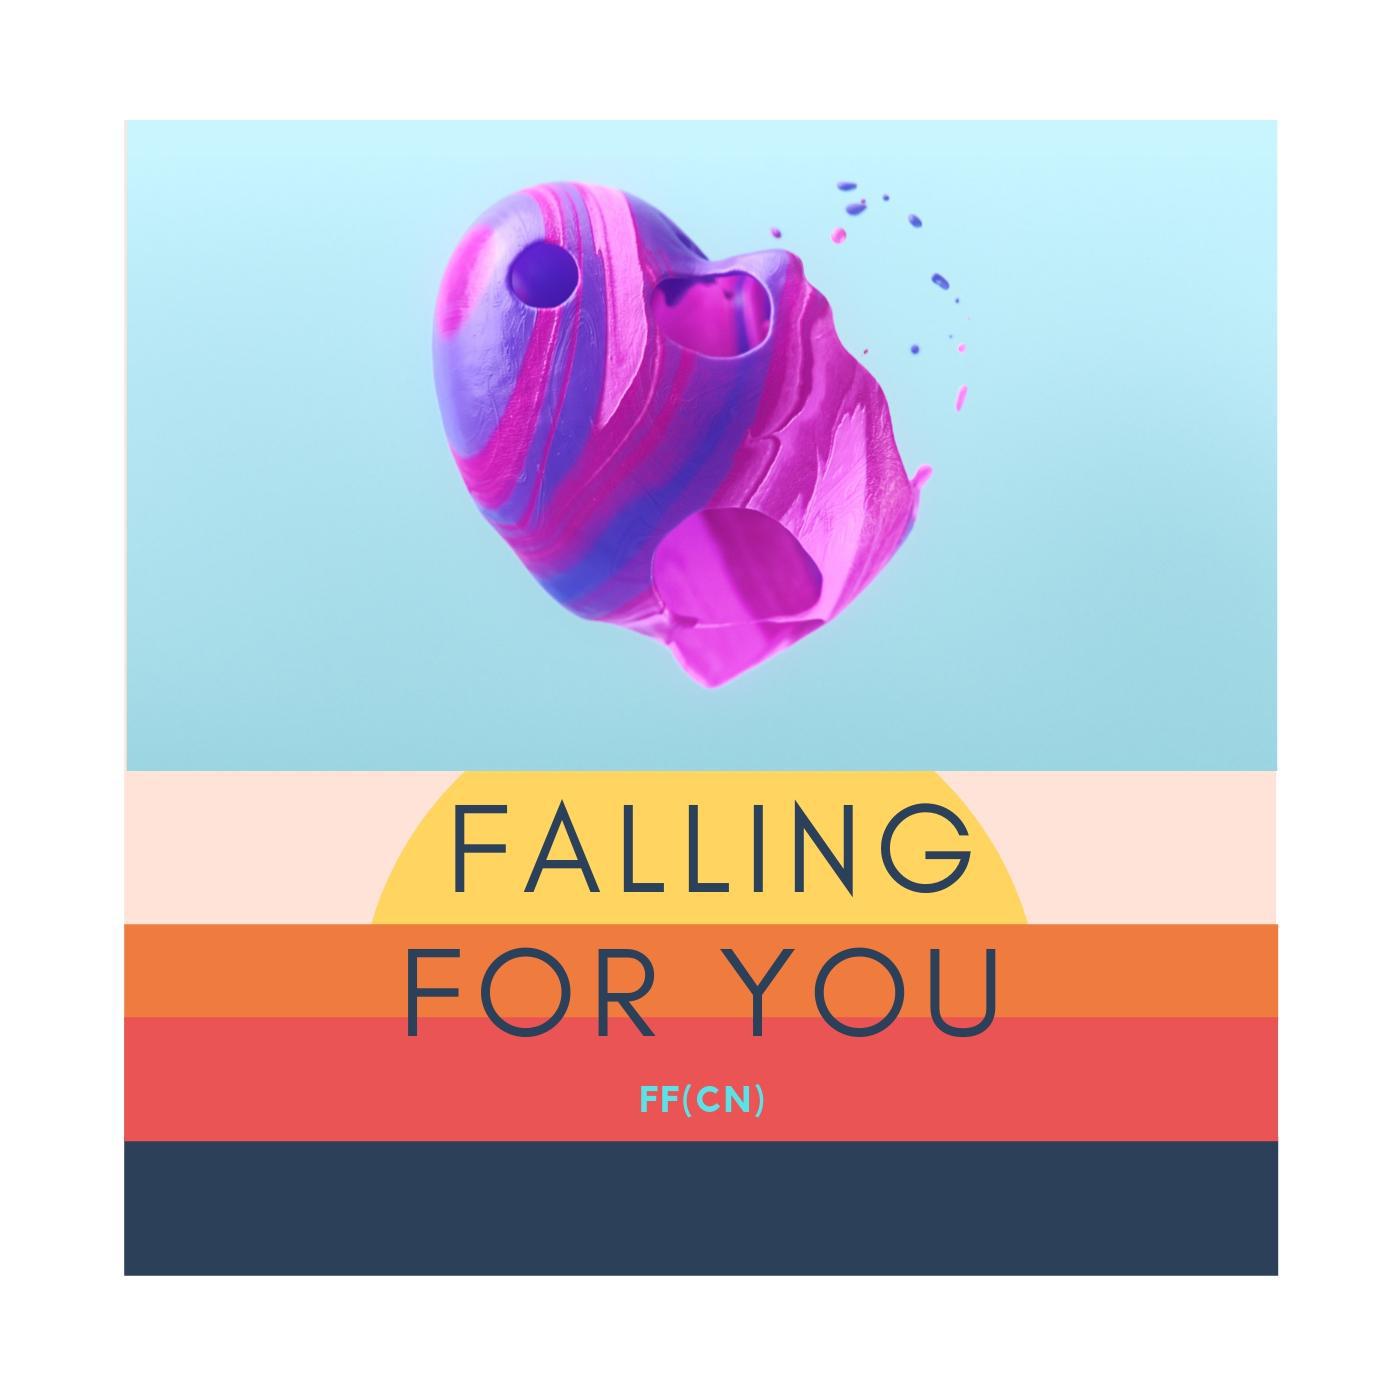 Falling For You 为你坠落